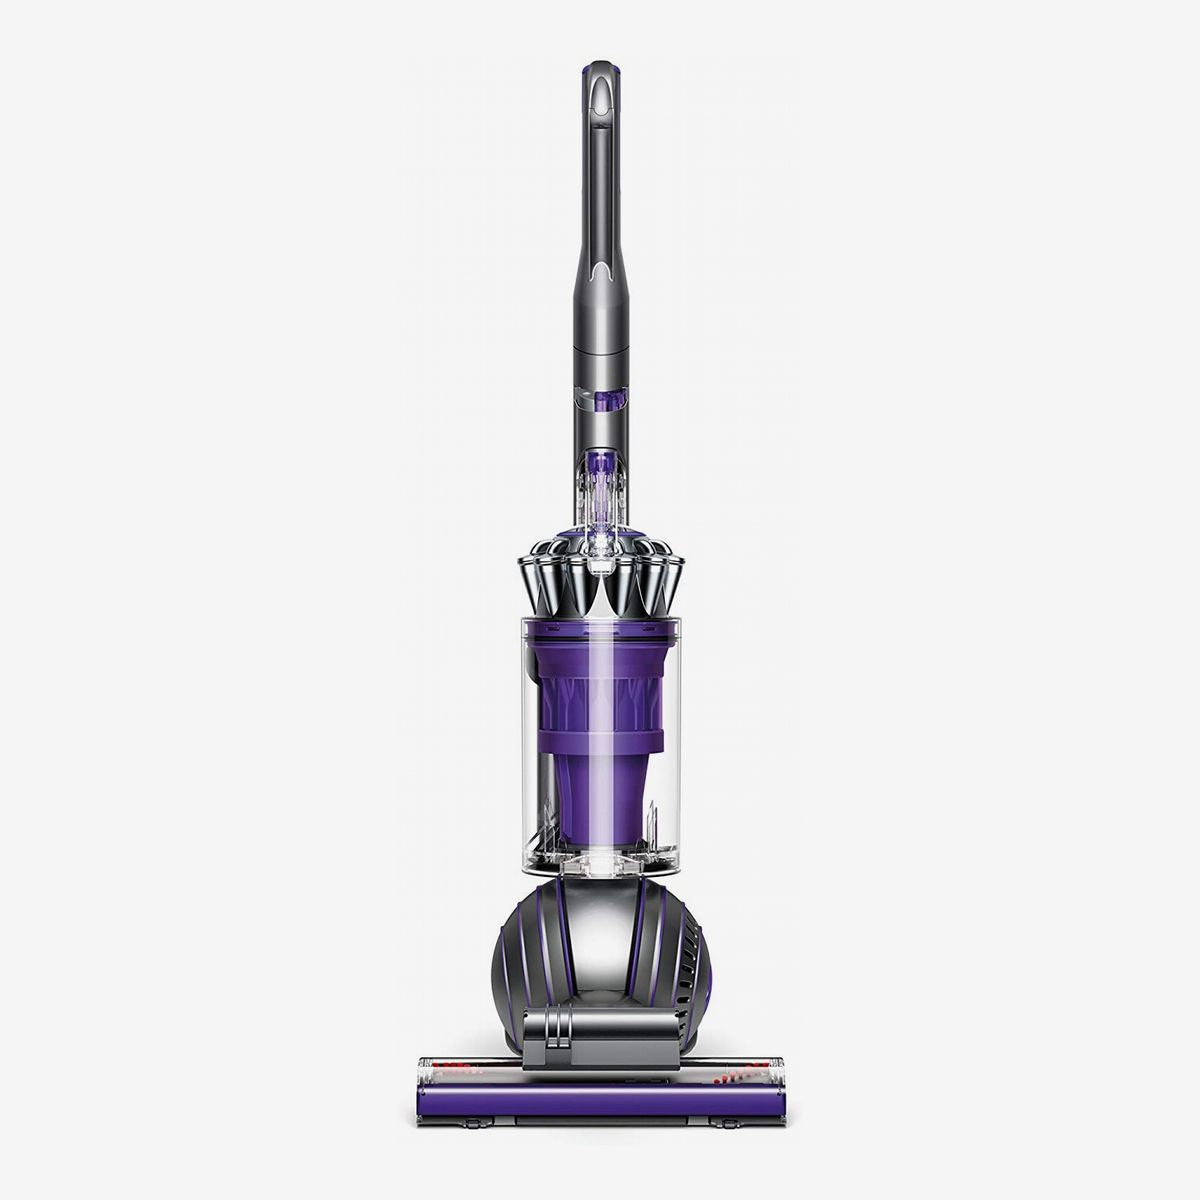 18 Best Vacuums For Pet Hair 2021 The, Best Vacuum For Hardwood Floors And Pet Hair